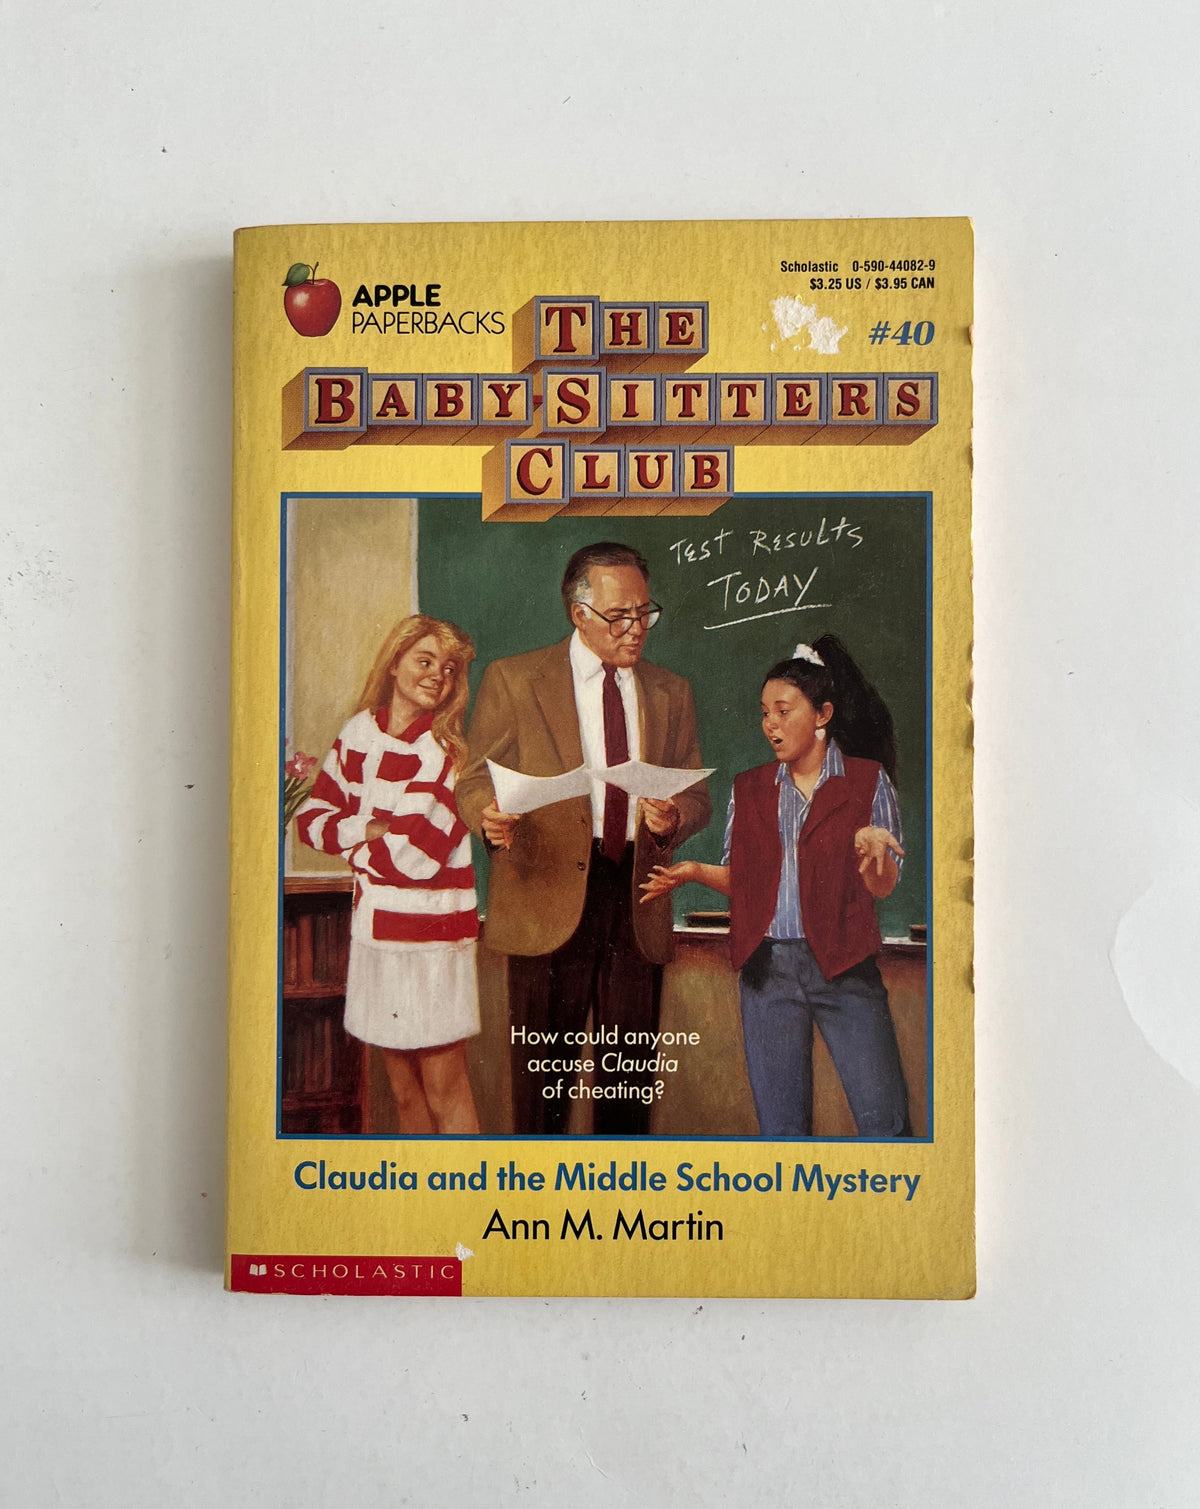 The Babysitters Club: Claudia and the Middle School Mystery by Ann M. Martin